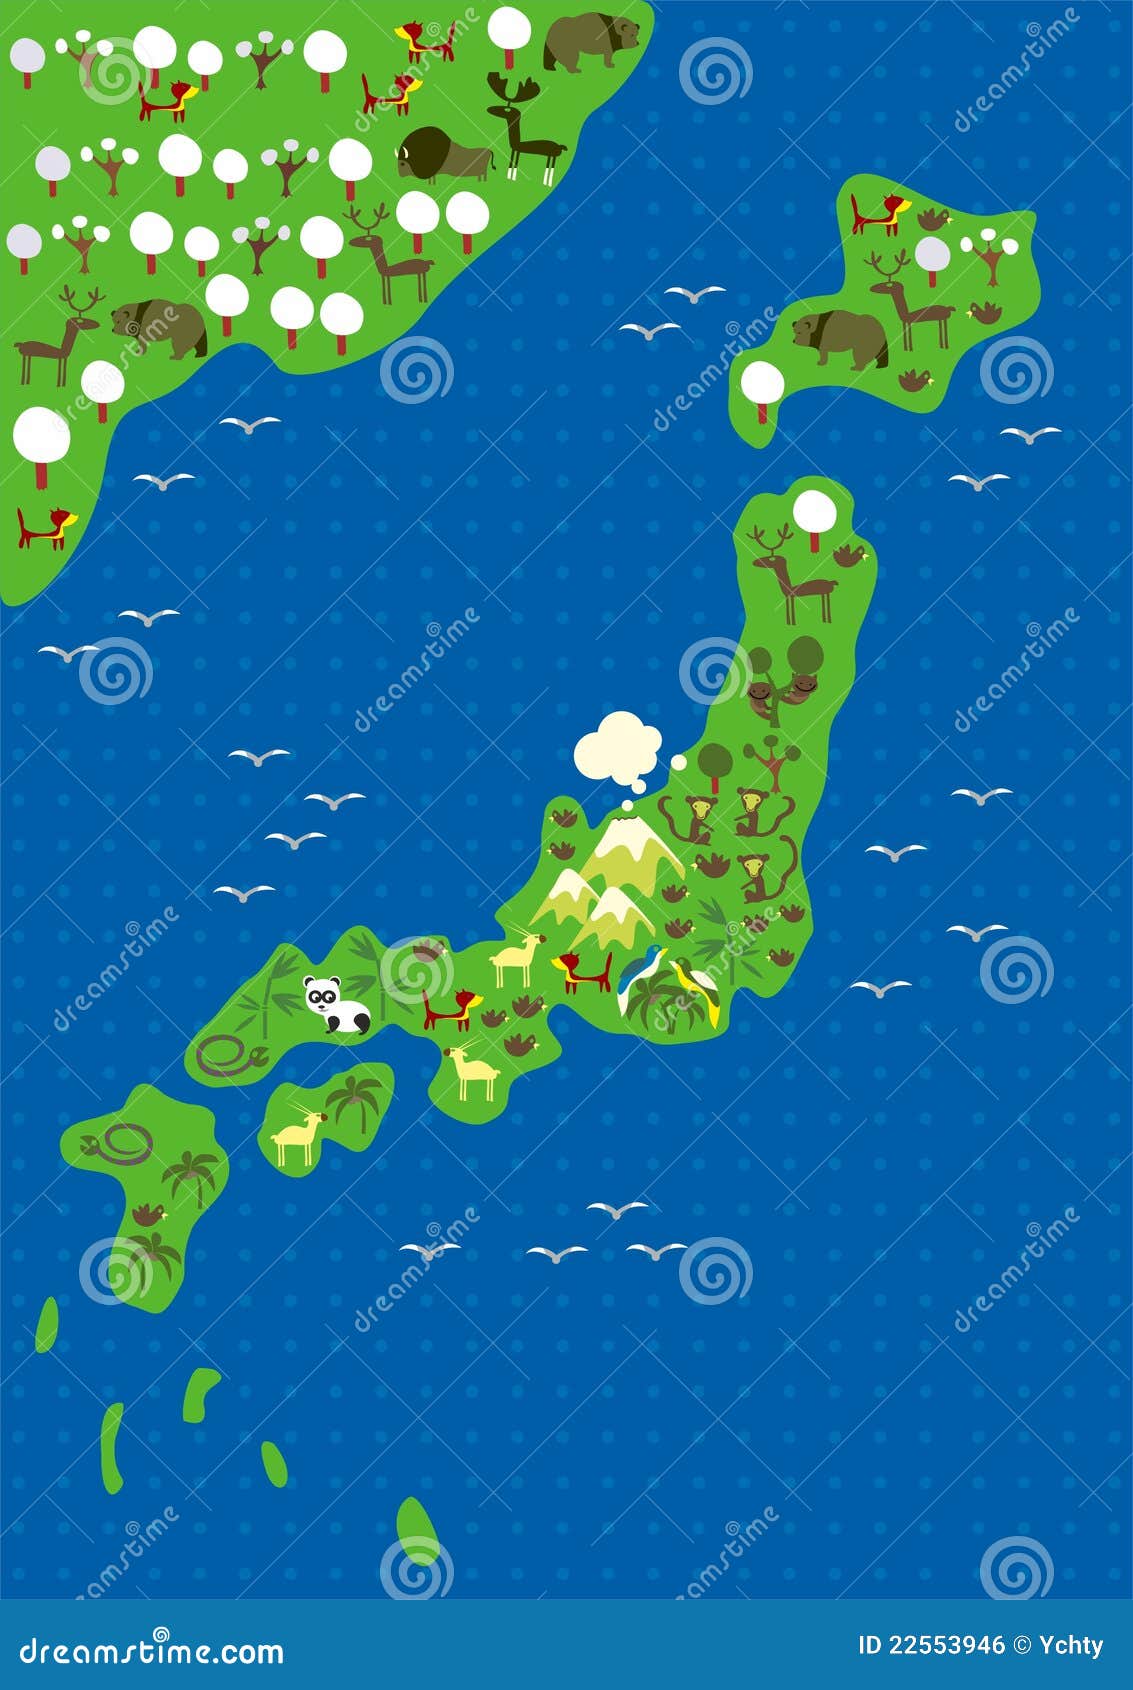 clipart map of japan - photo #39